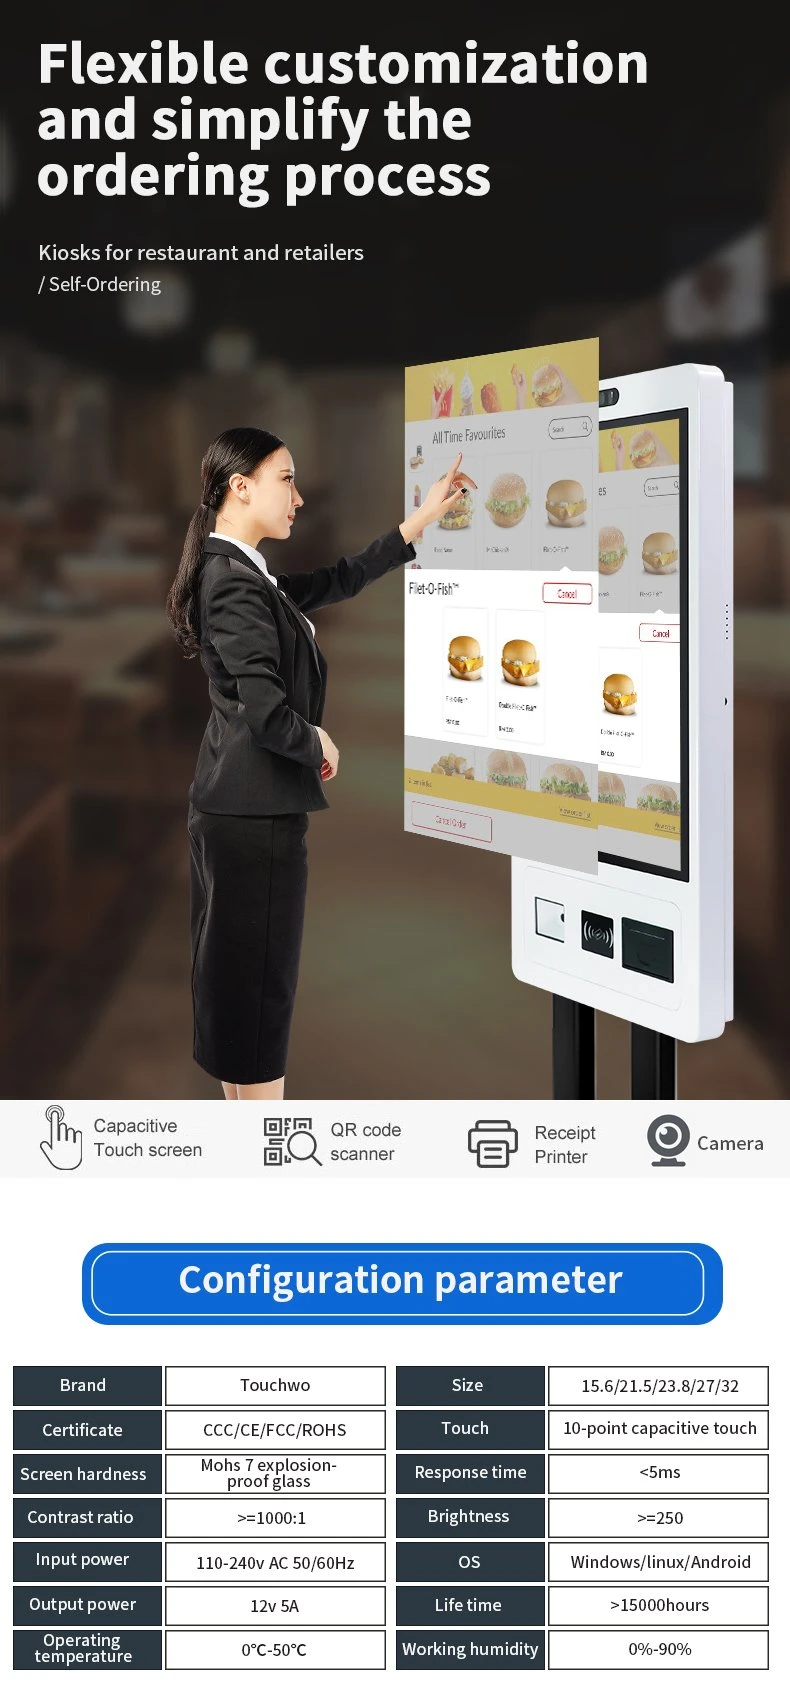 Fast Food Restaurant 32 Inch All in One PC Touch Screen Self Service Ordering Kiosk